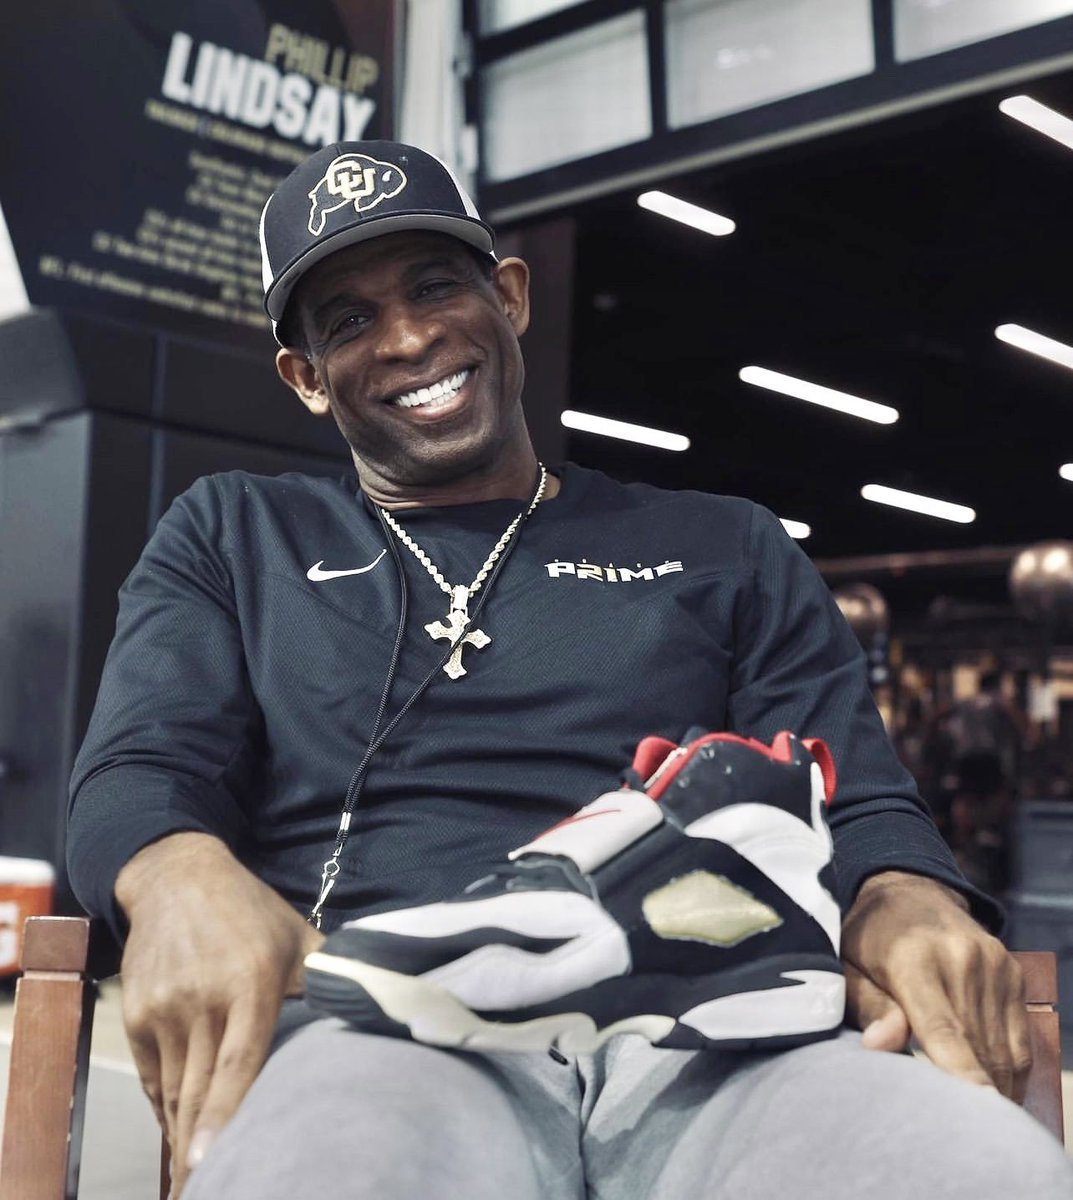 Deion Sanders Re-Signs with Nike